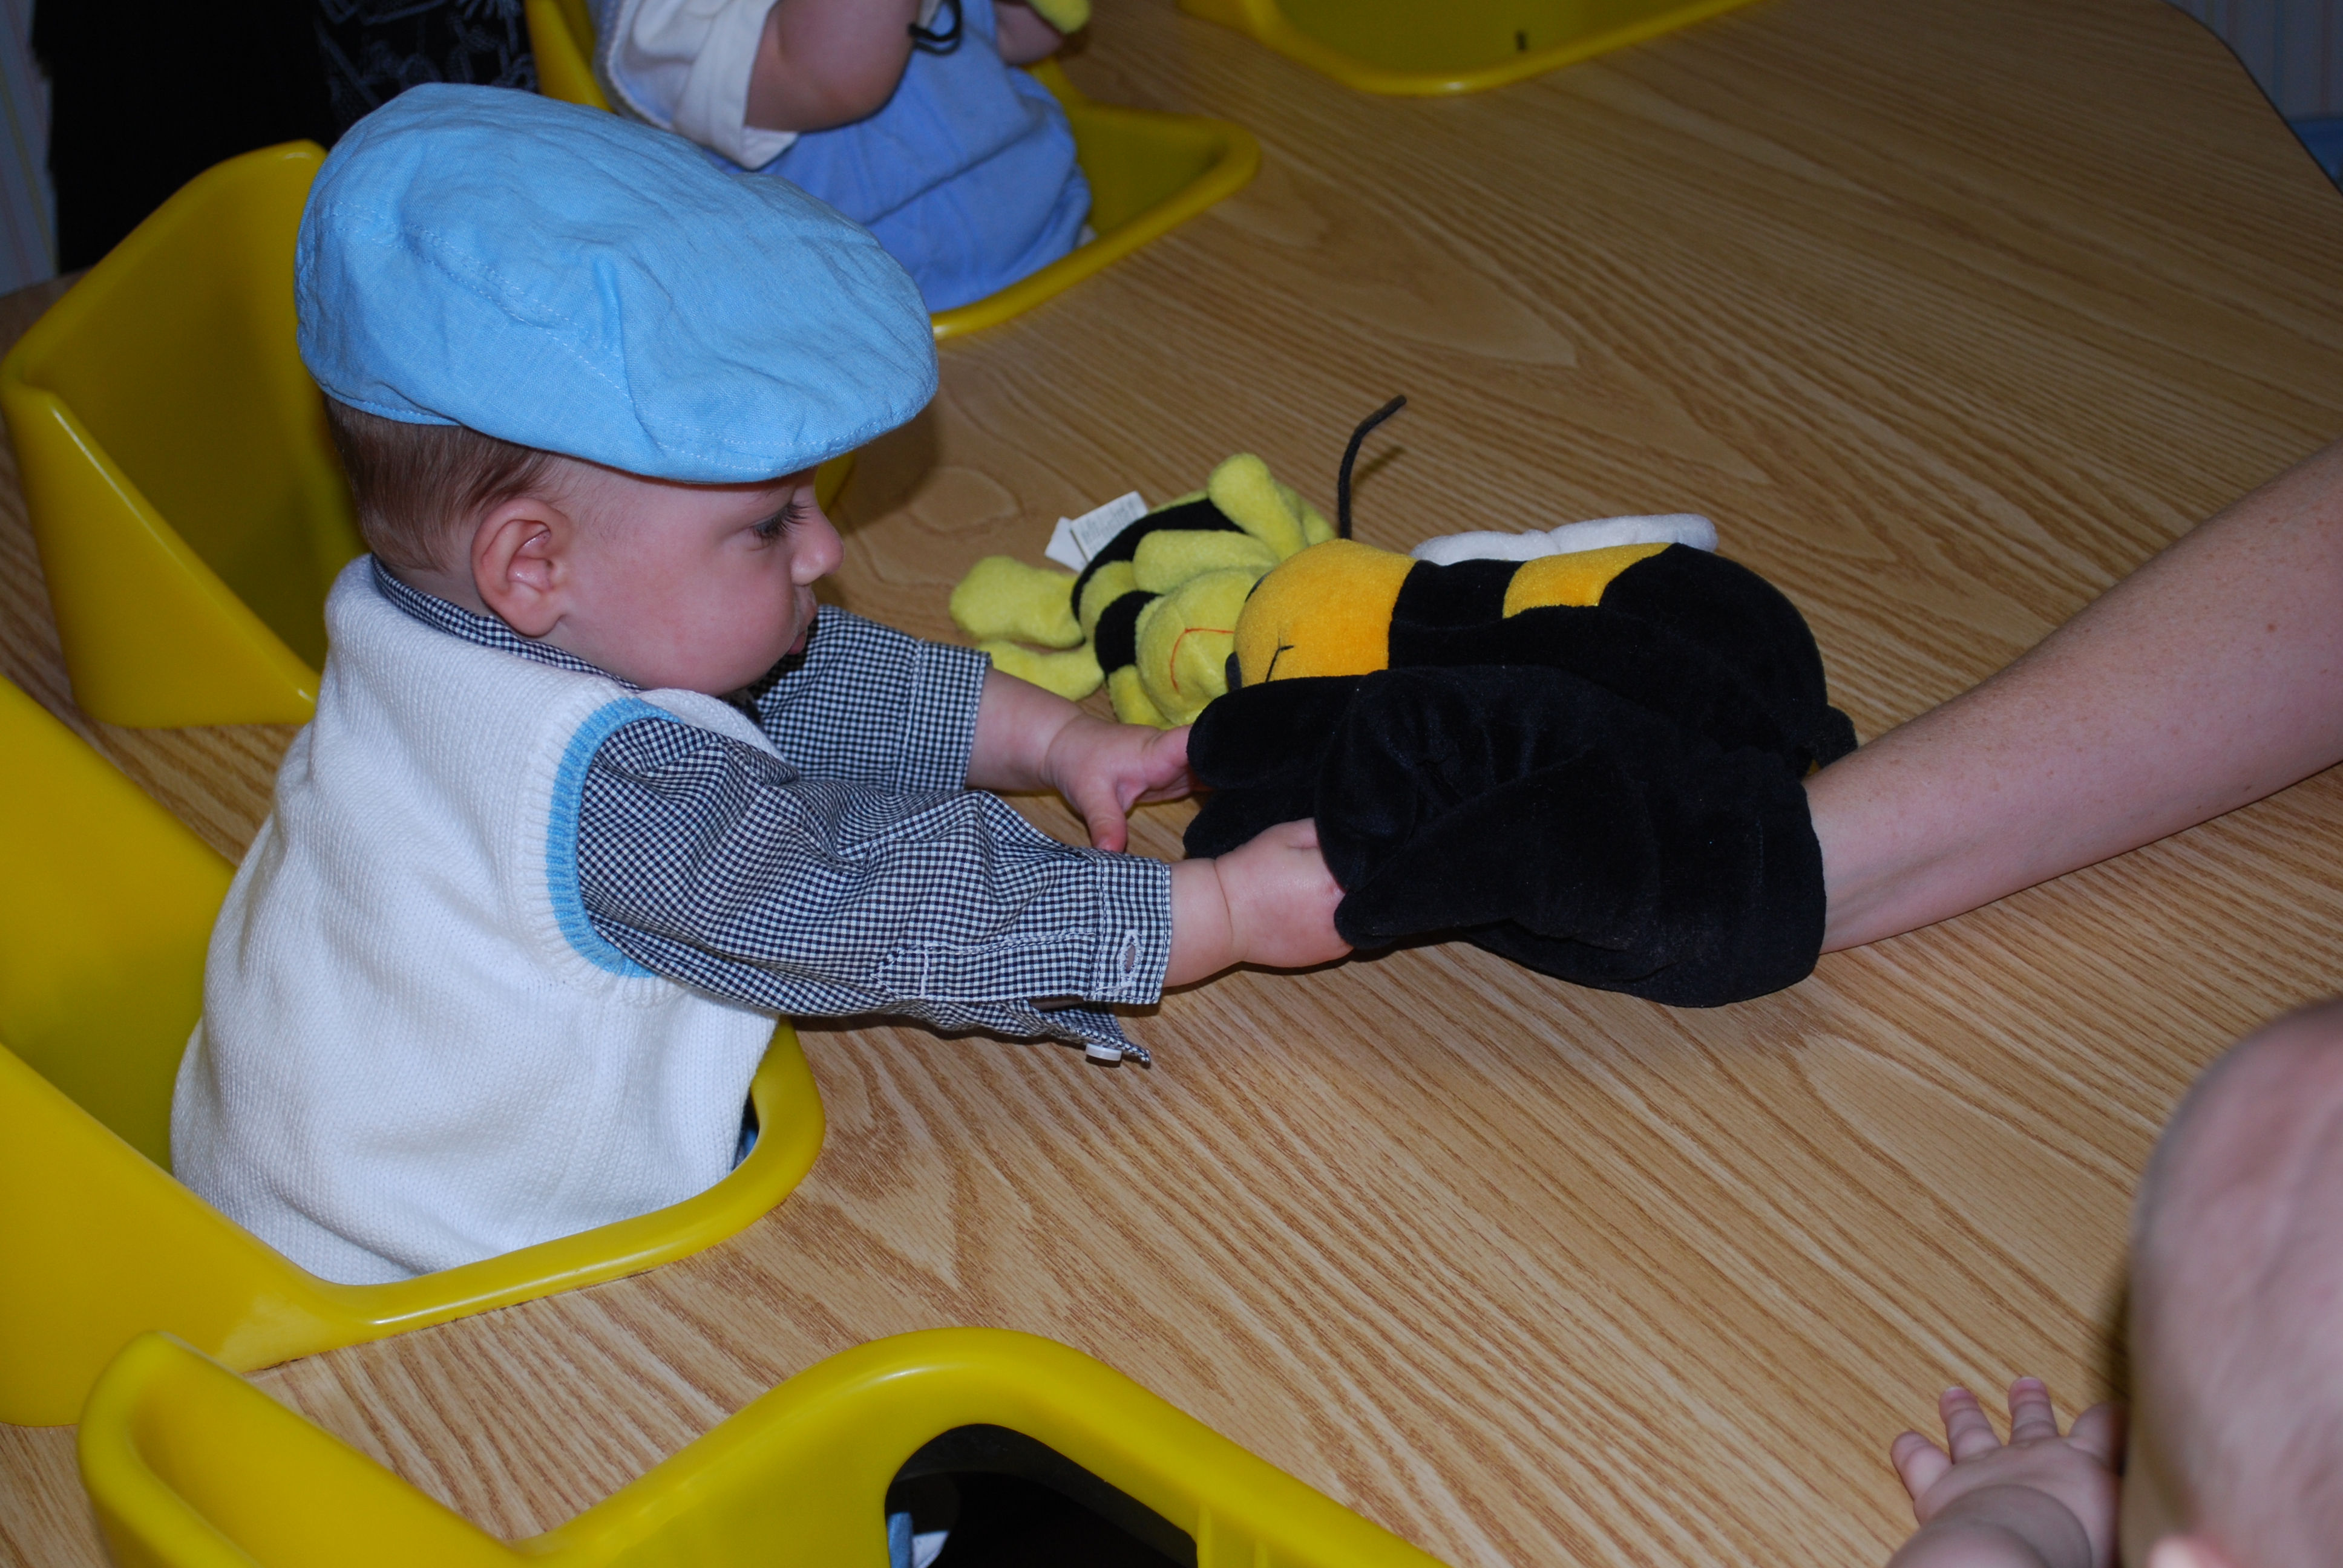 Learning that children should be "busy bees" and invite their friends to Bible Class.